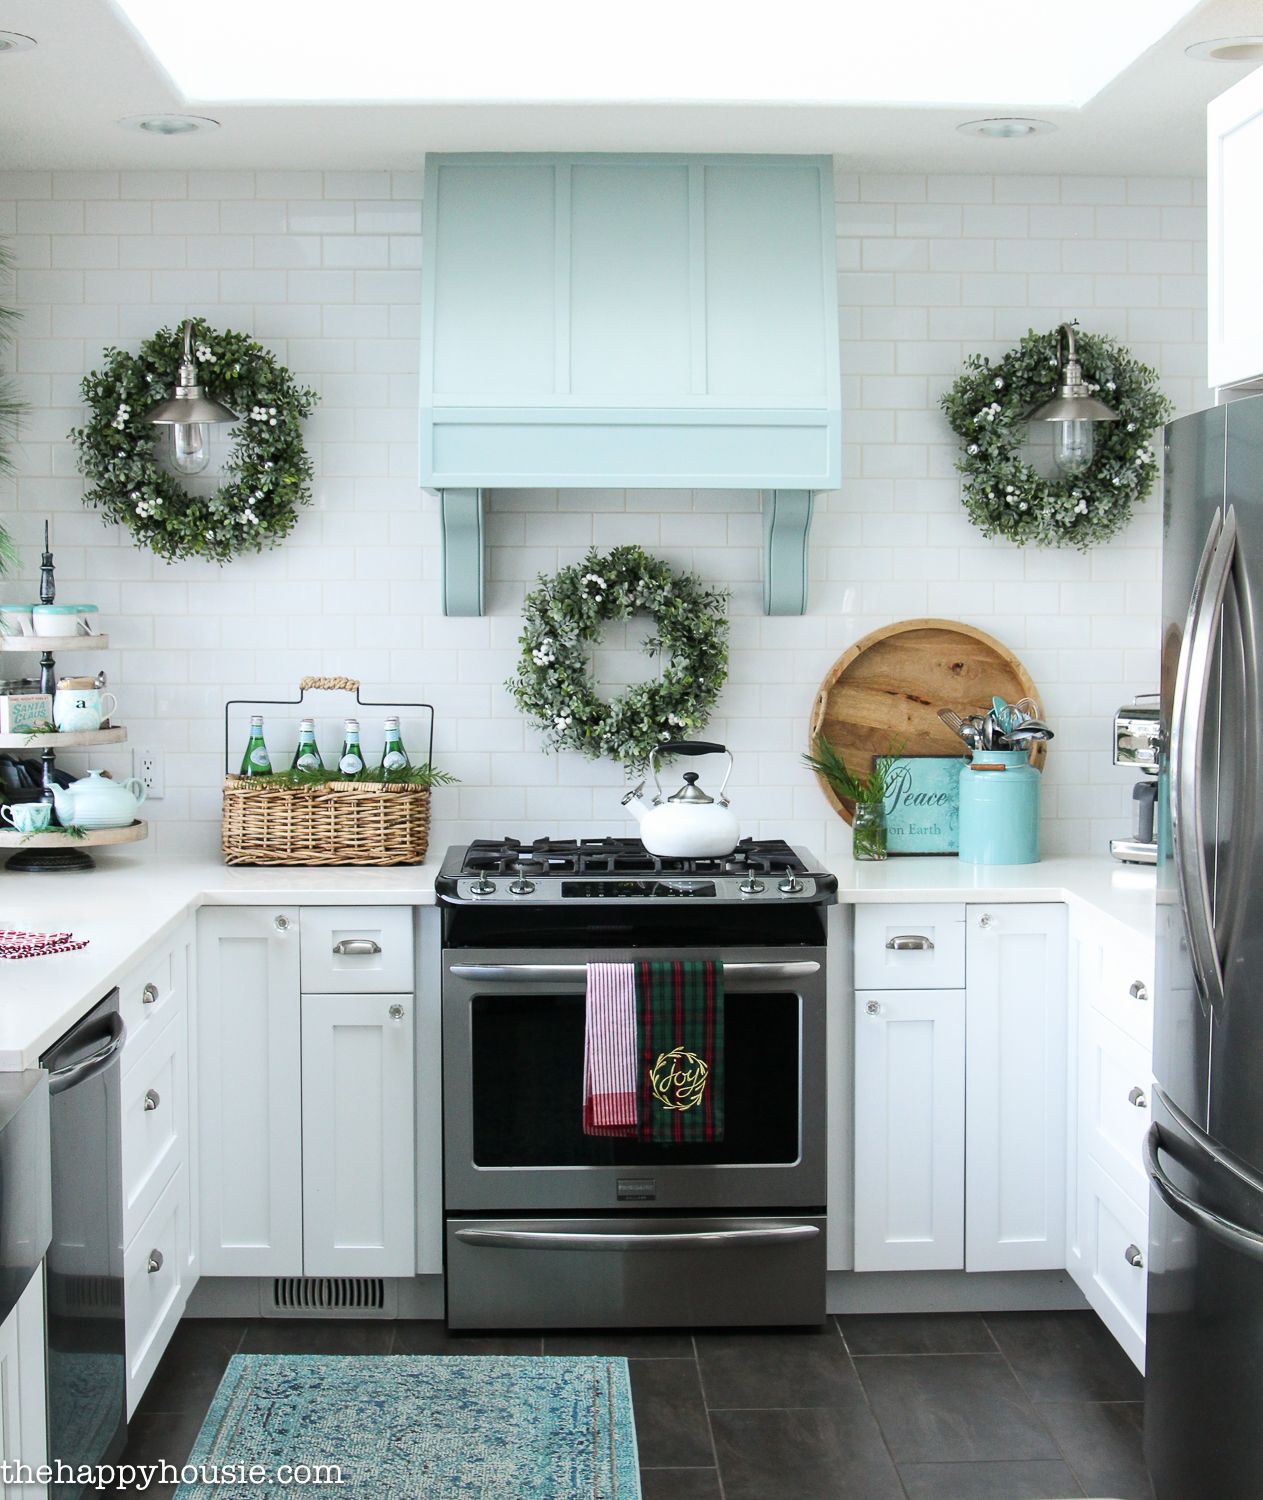 A blue and white kitchen decorated for Christmas.